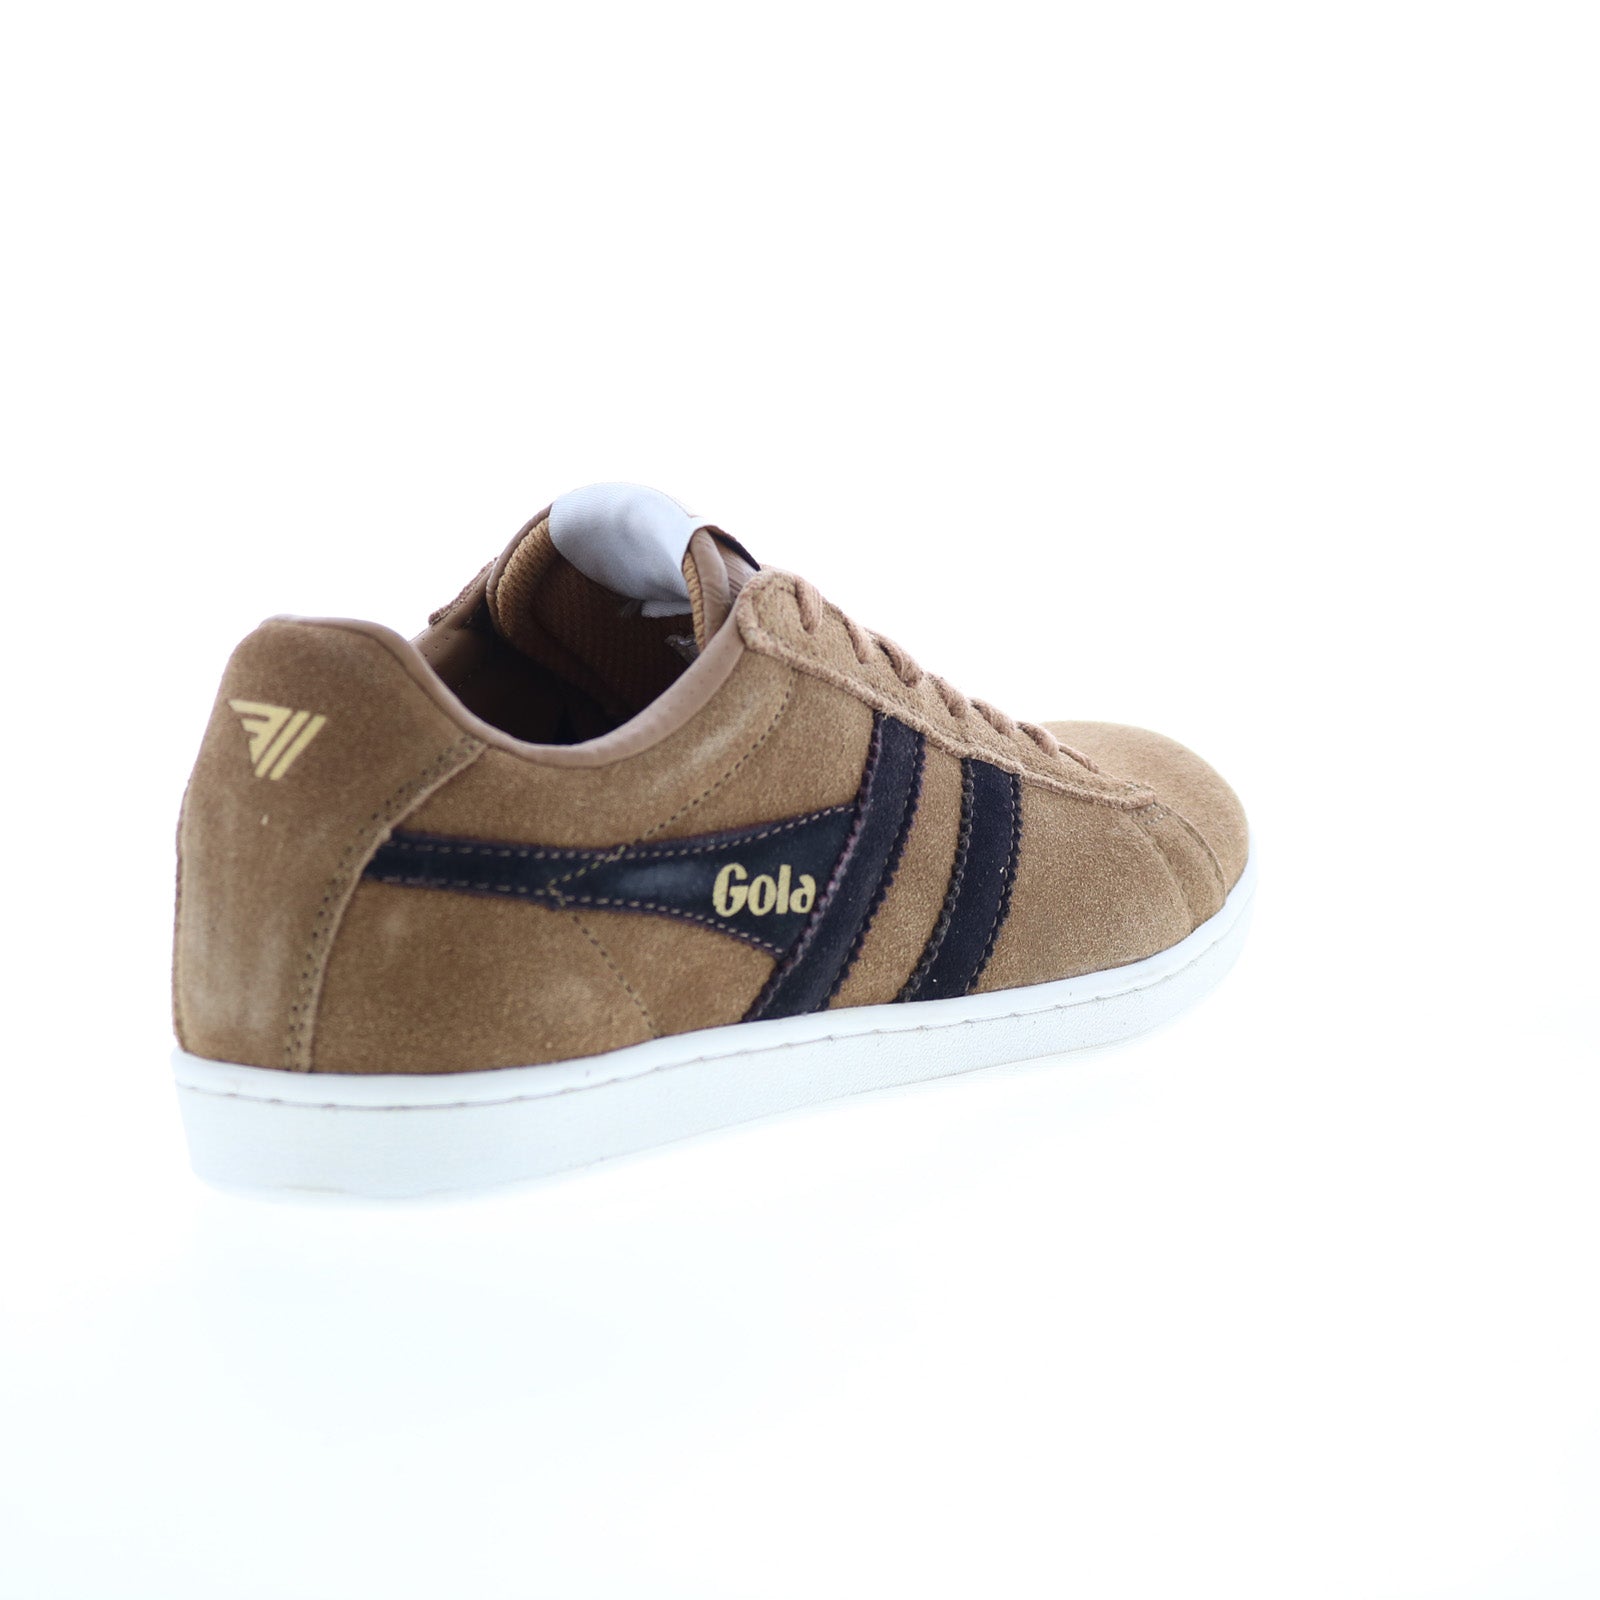 Gola Equipe Suede CMA495 Mens Brown Suede Lace Up Lifestyle Sneakers Shoes